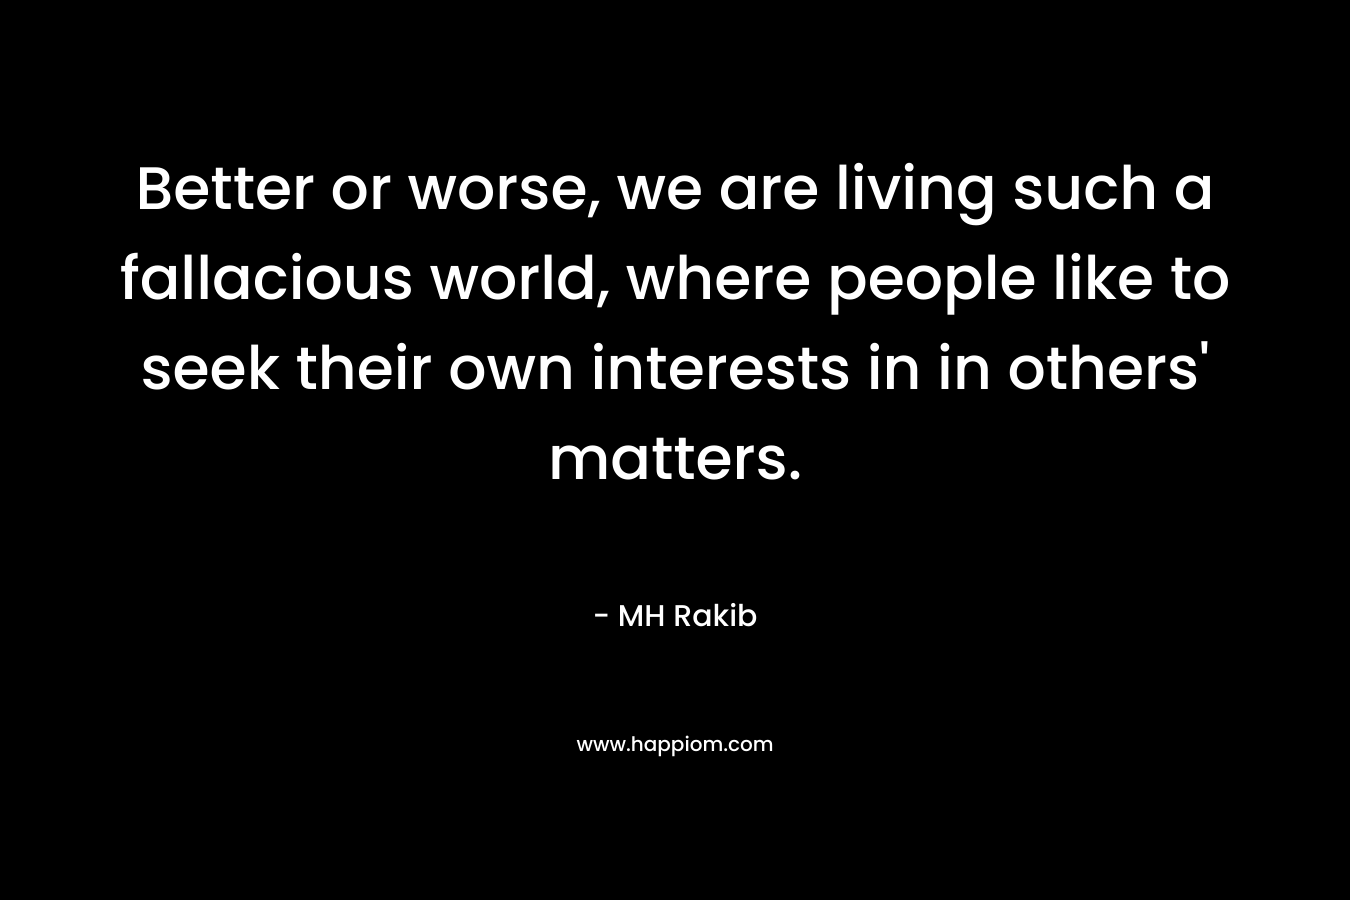 Better or worse, we are living such a fallacious world, where people like to seek their own interests in in others’ matters. – MH Rakib